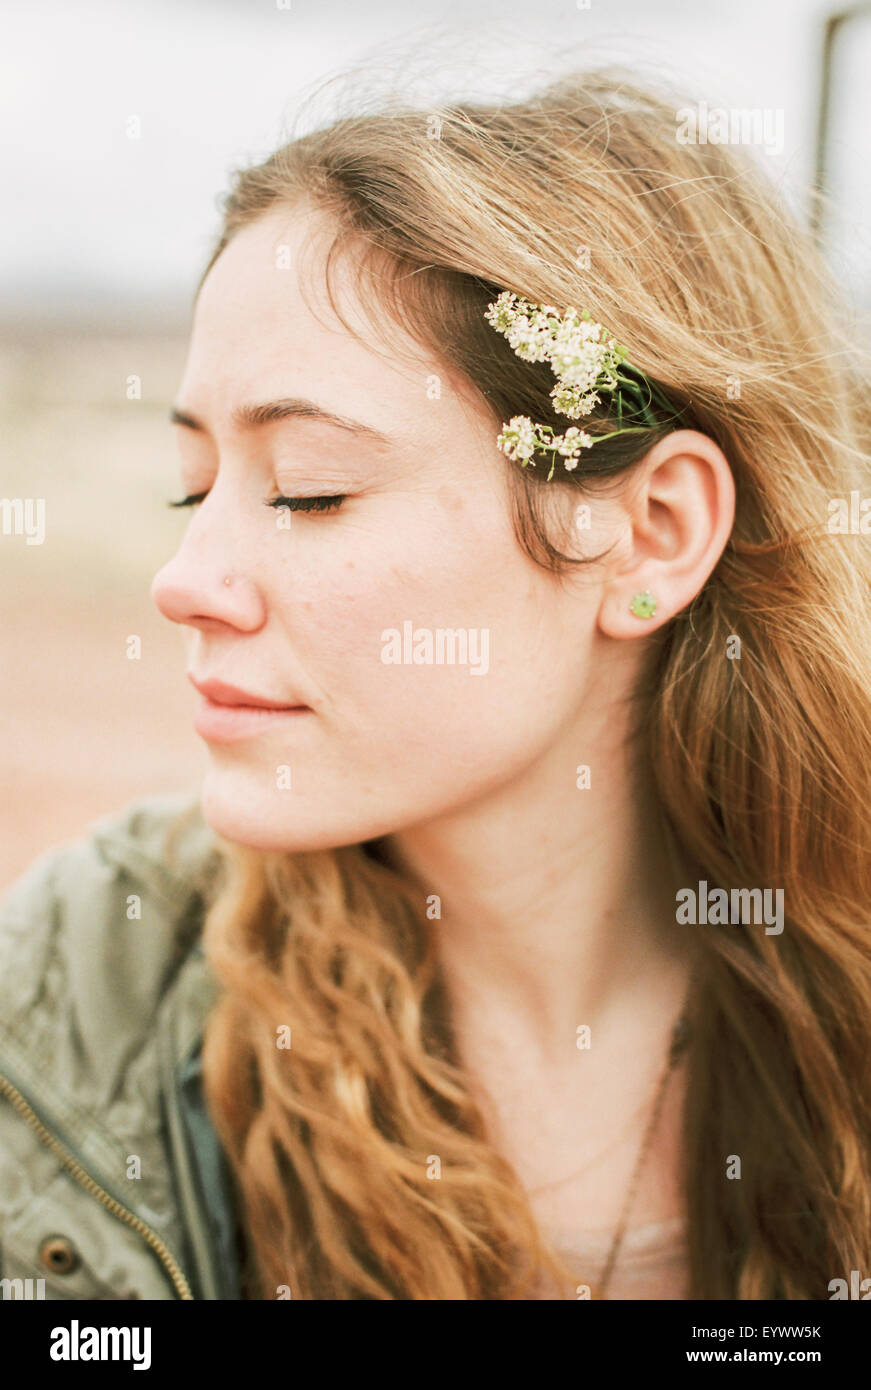 Head and shoulders portrait of a woman with a flower in her hair. Stock Photo